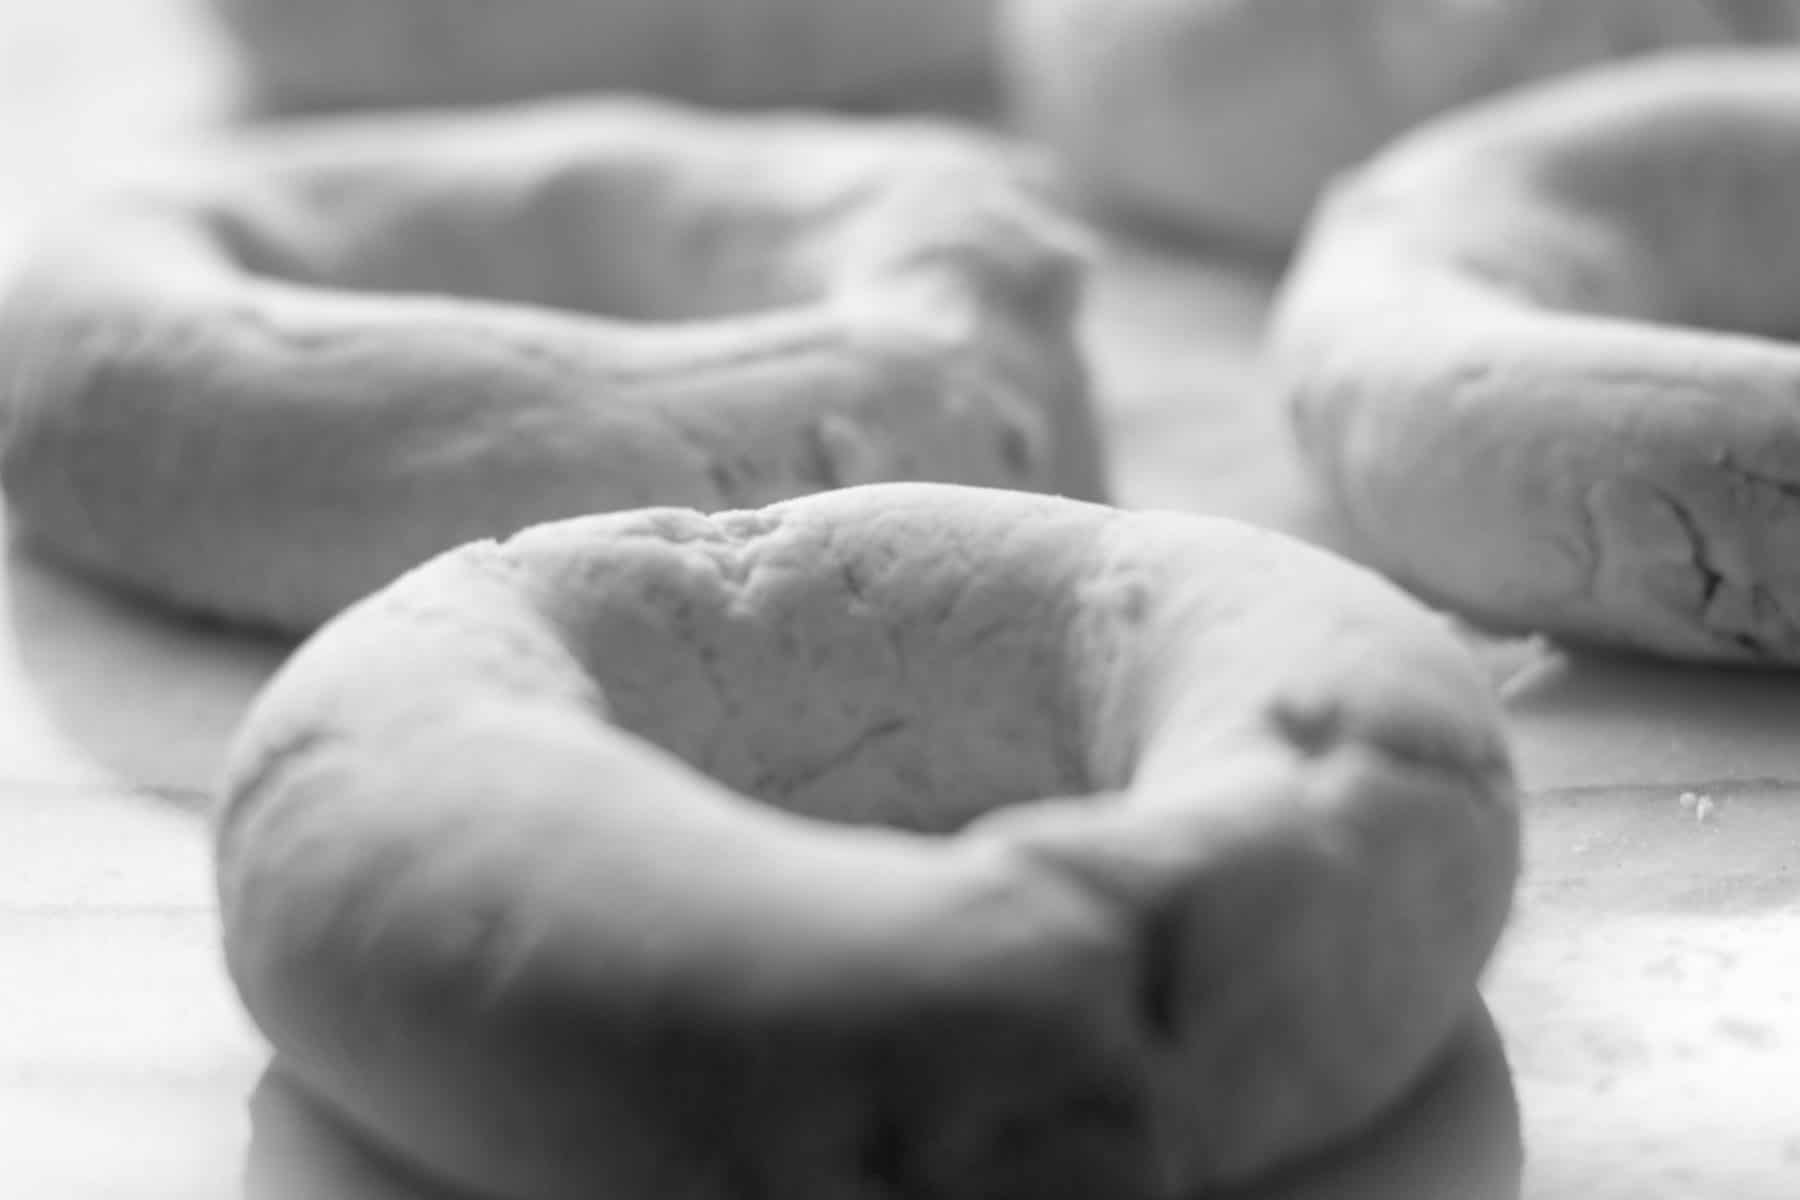 Bagels ready to be baked